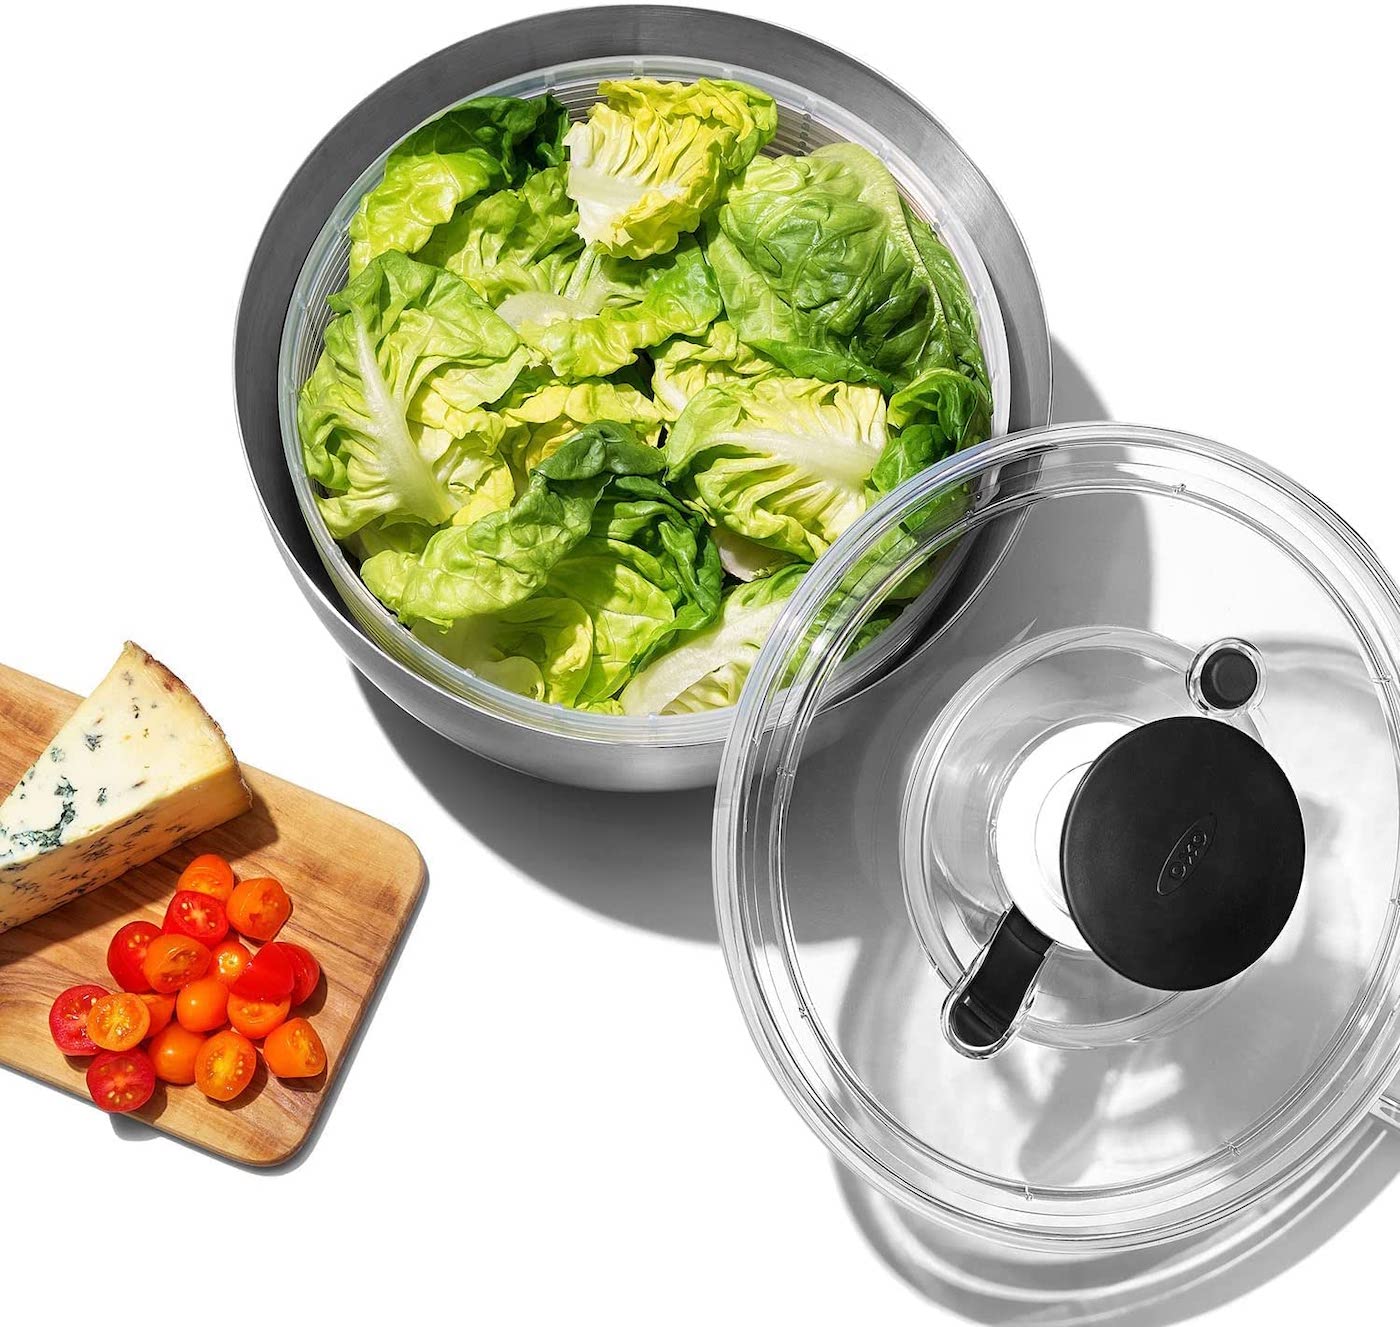 Best Salad Spinners in 2022 - Reviews